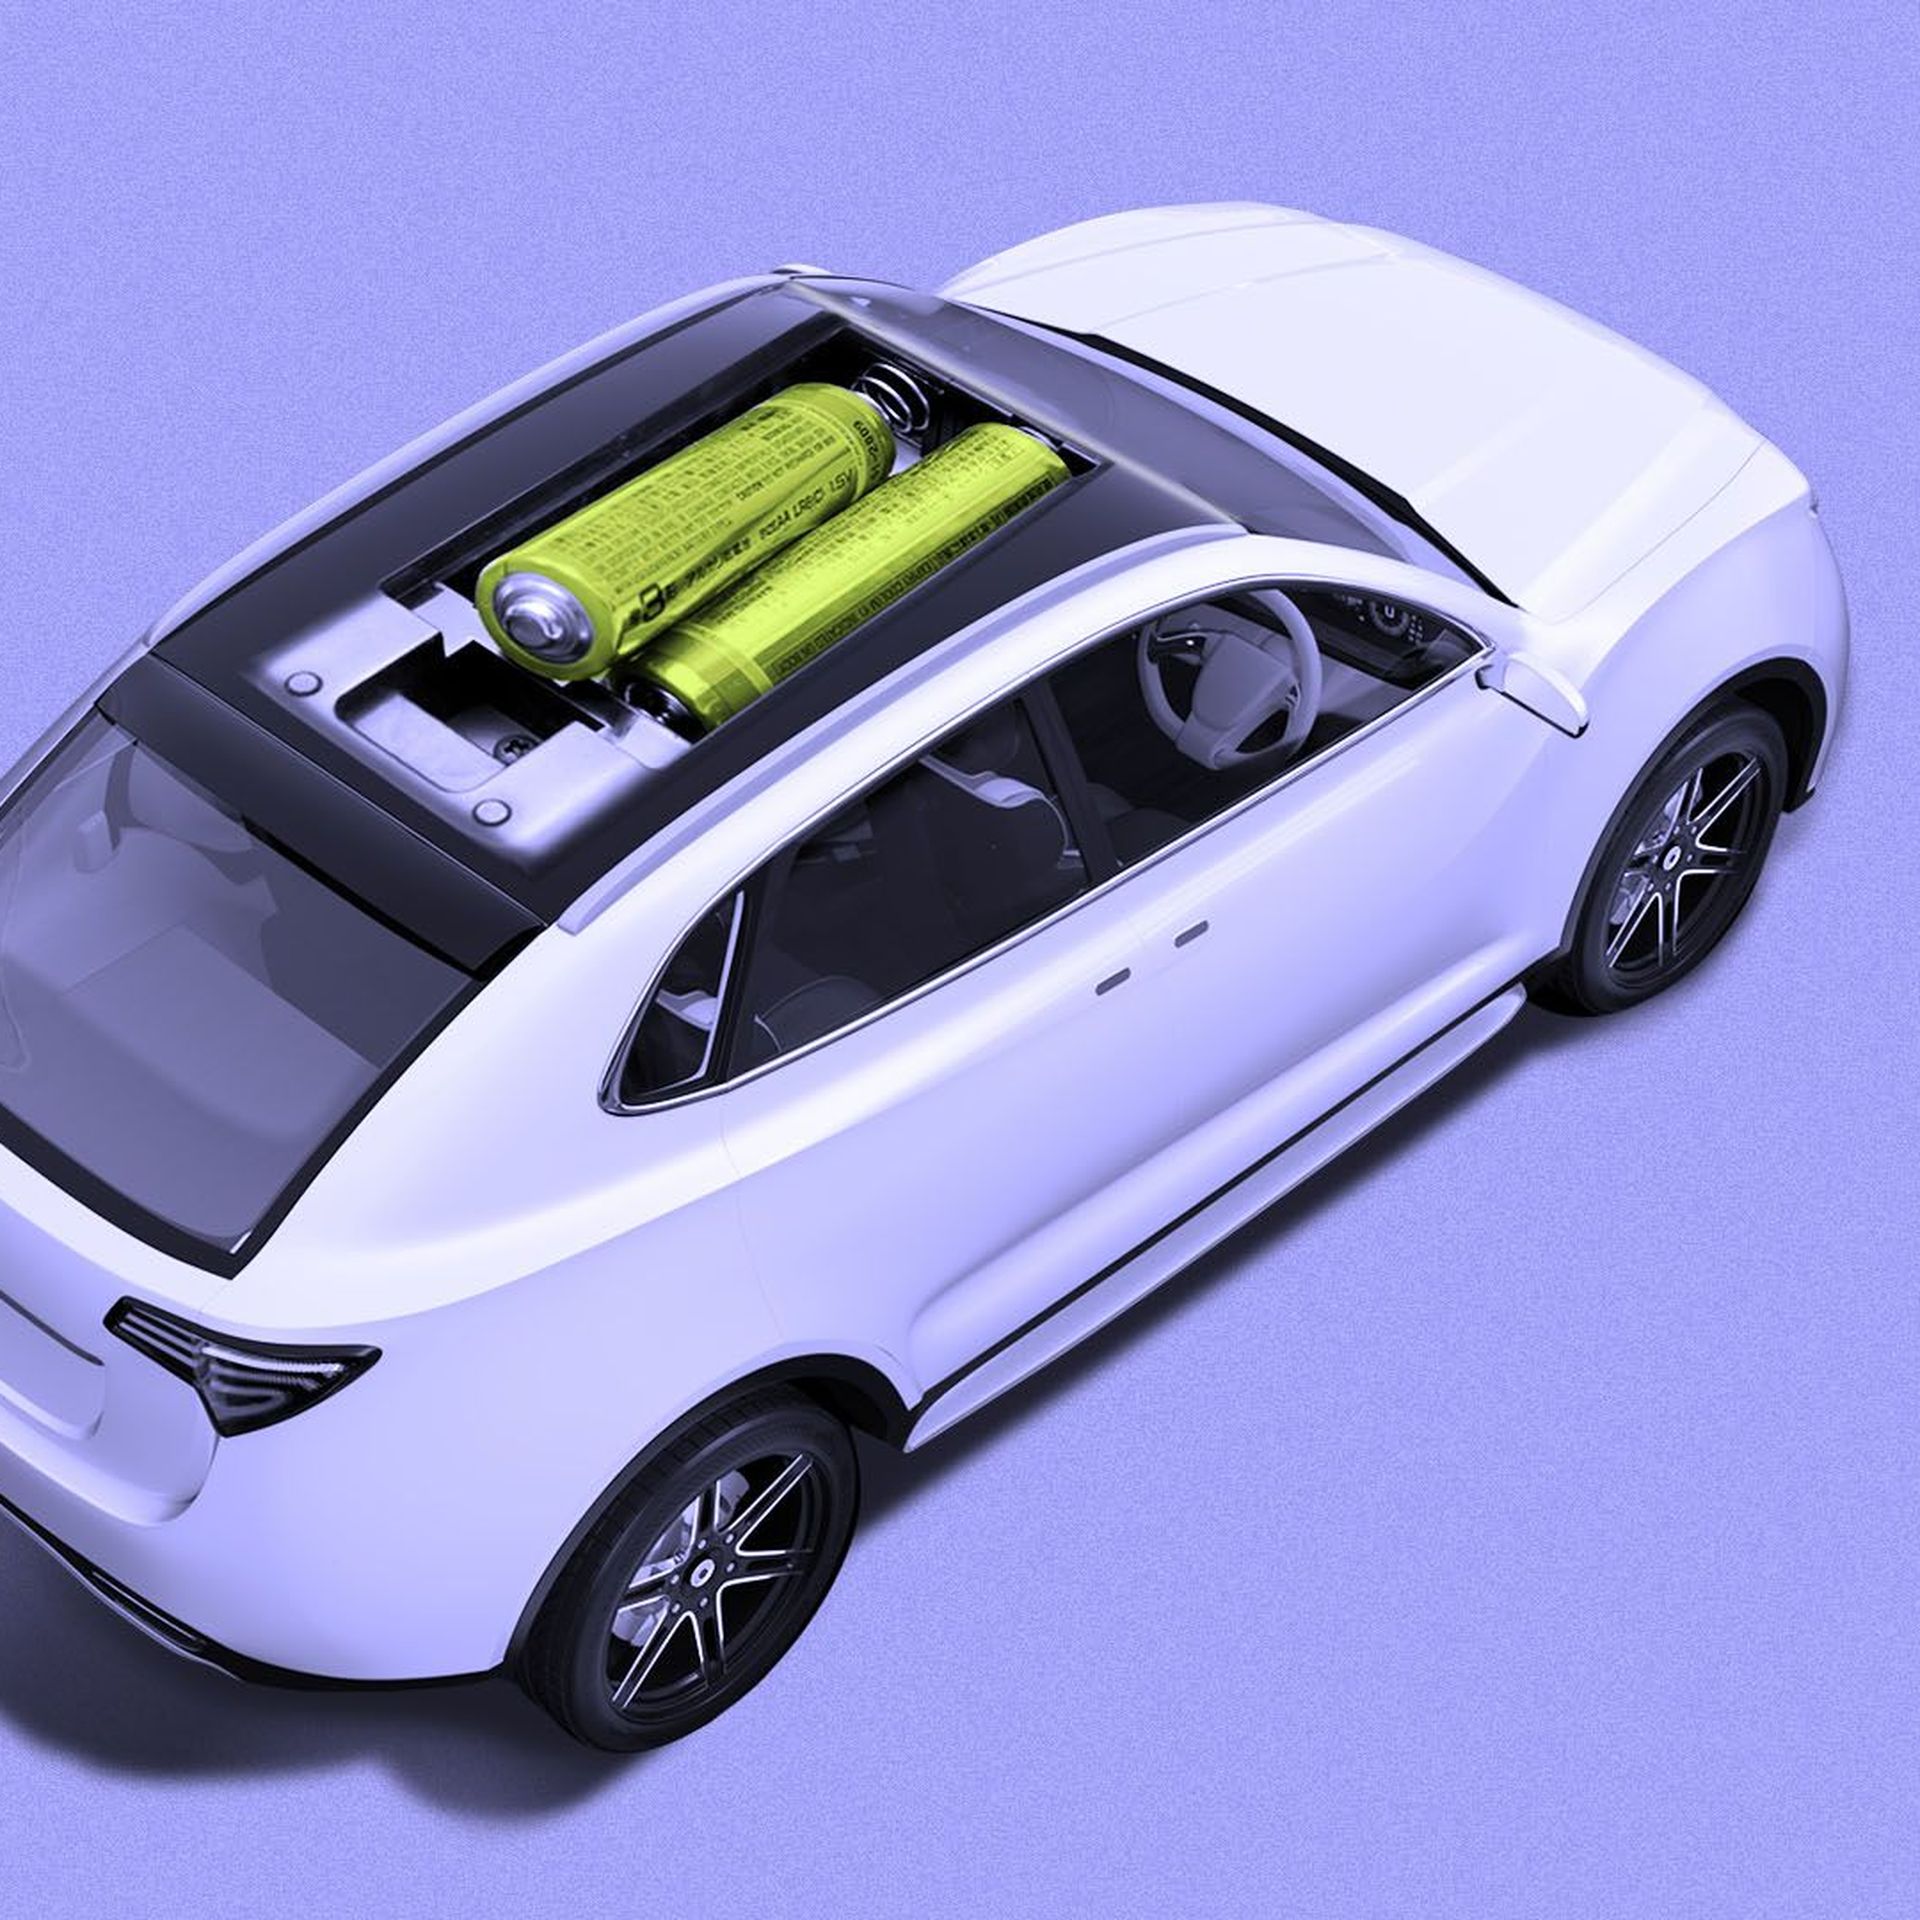 Illustration of car with batteries on top